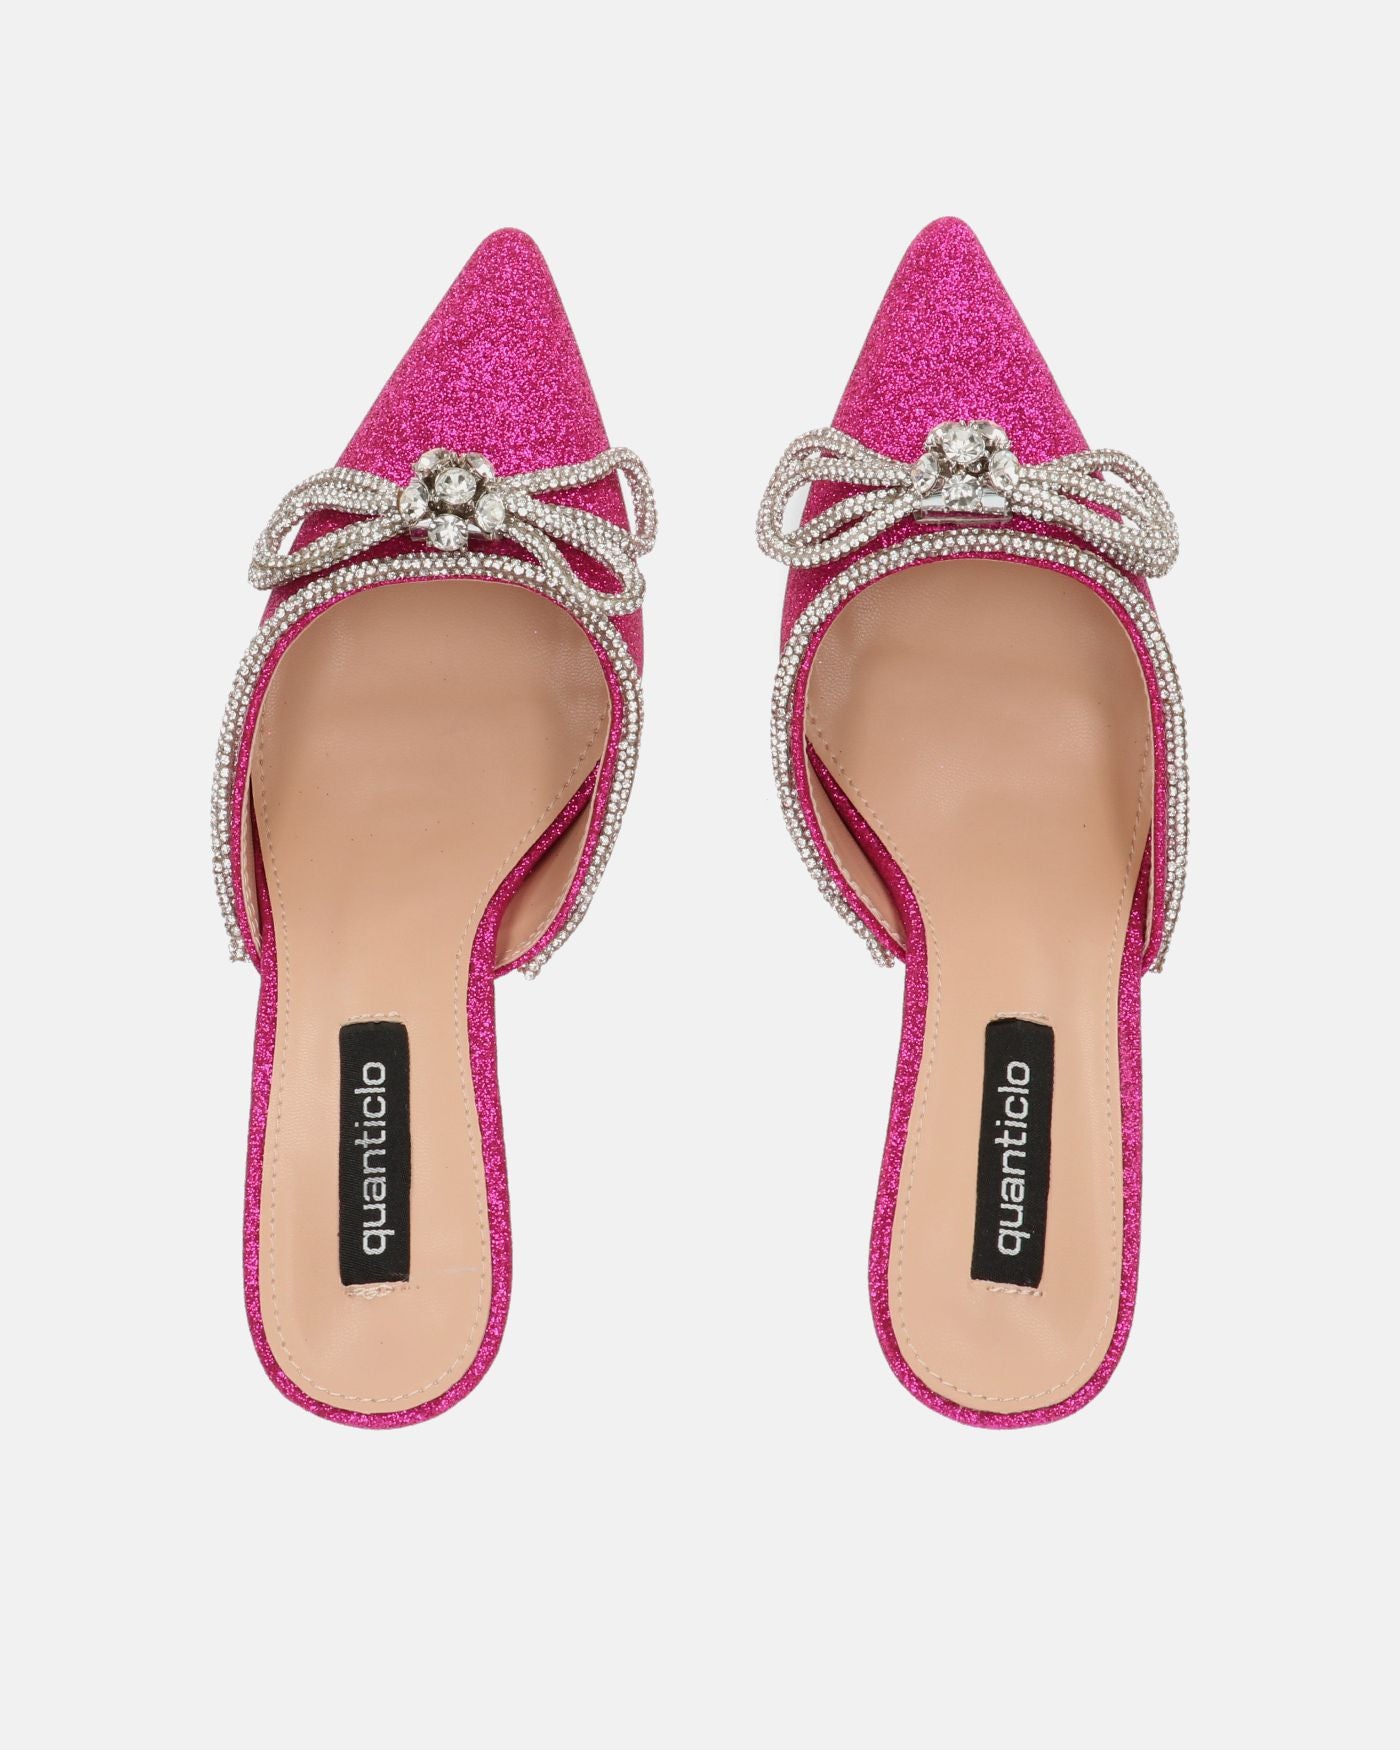 TABBY - fuchsia glitter shoes with gemstones bow